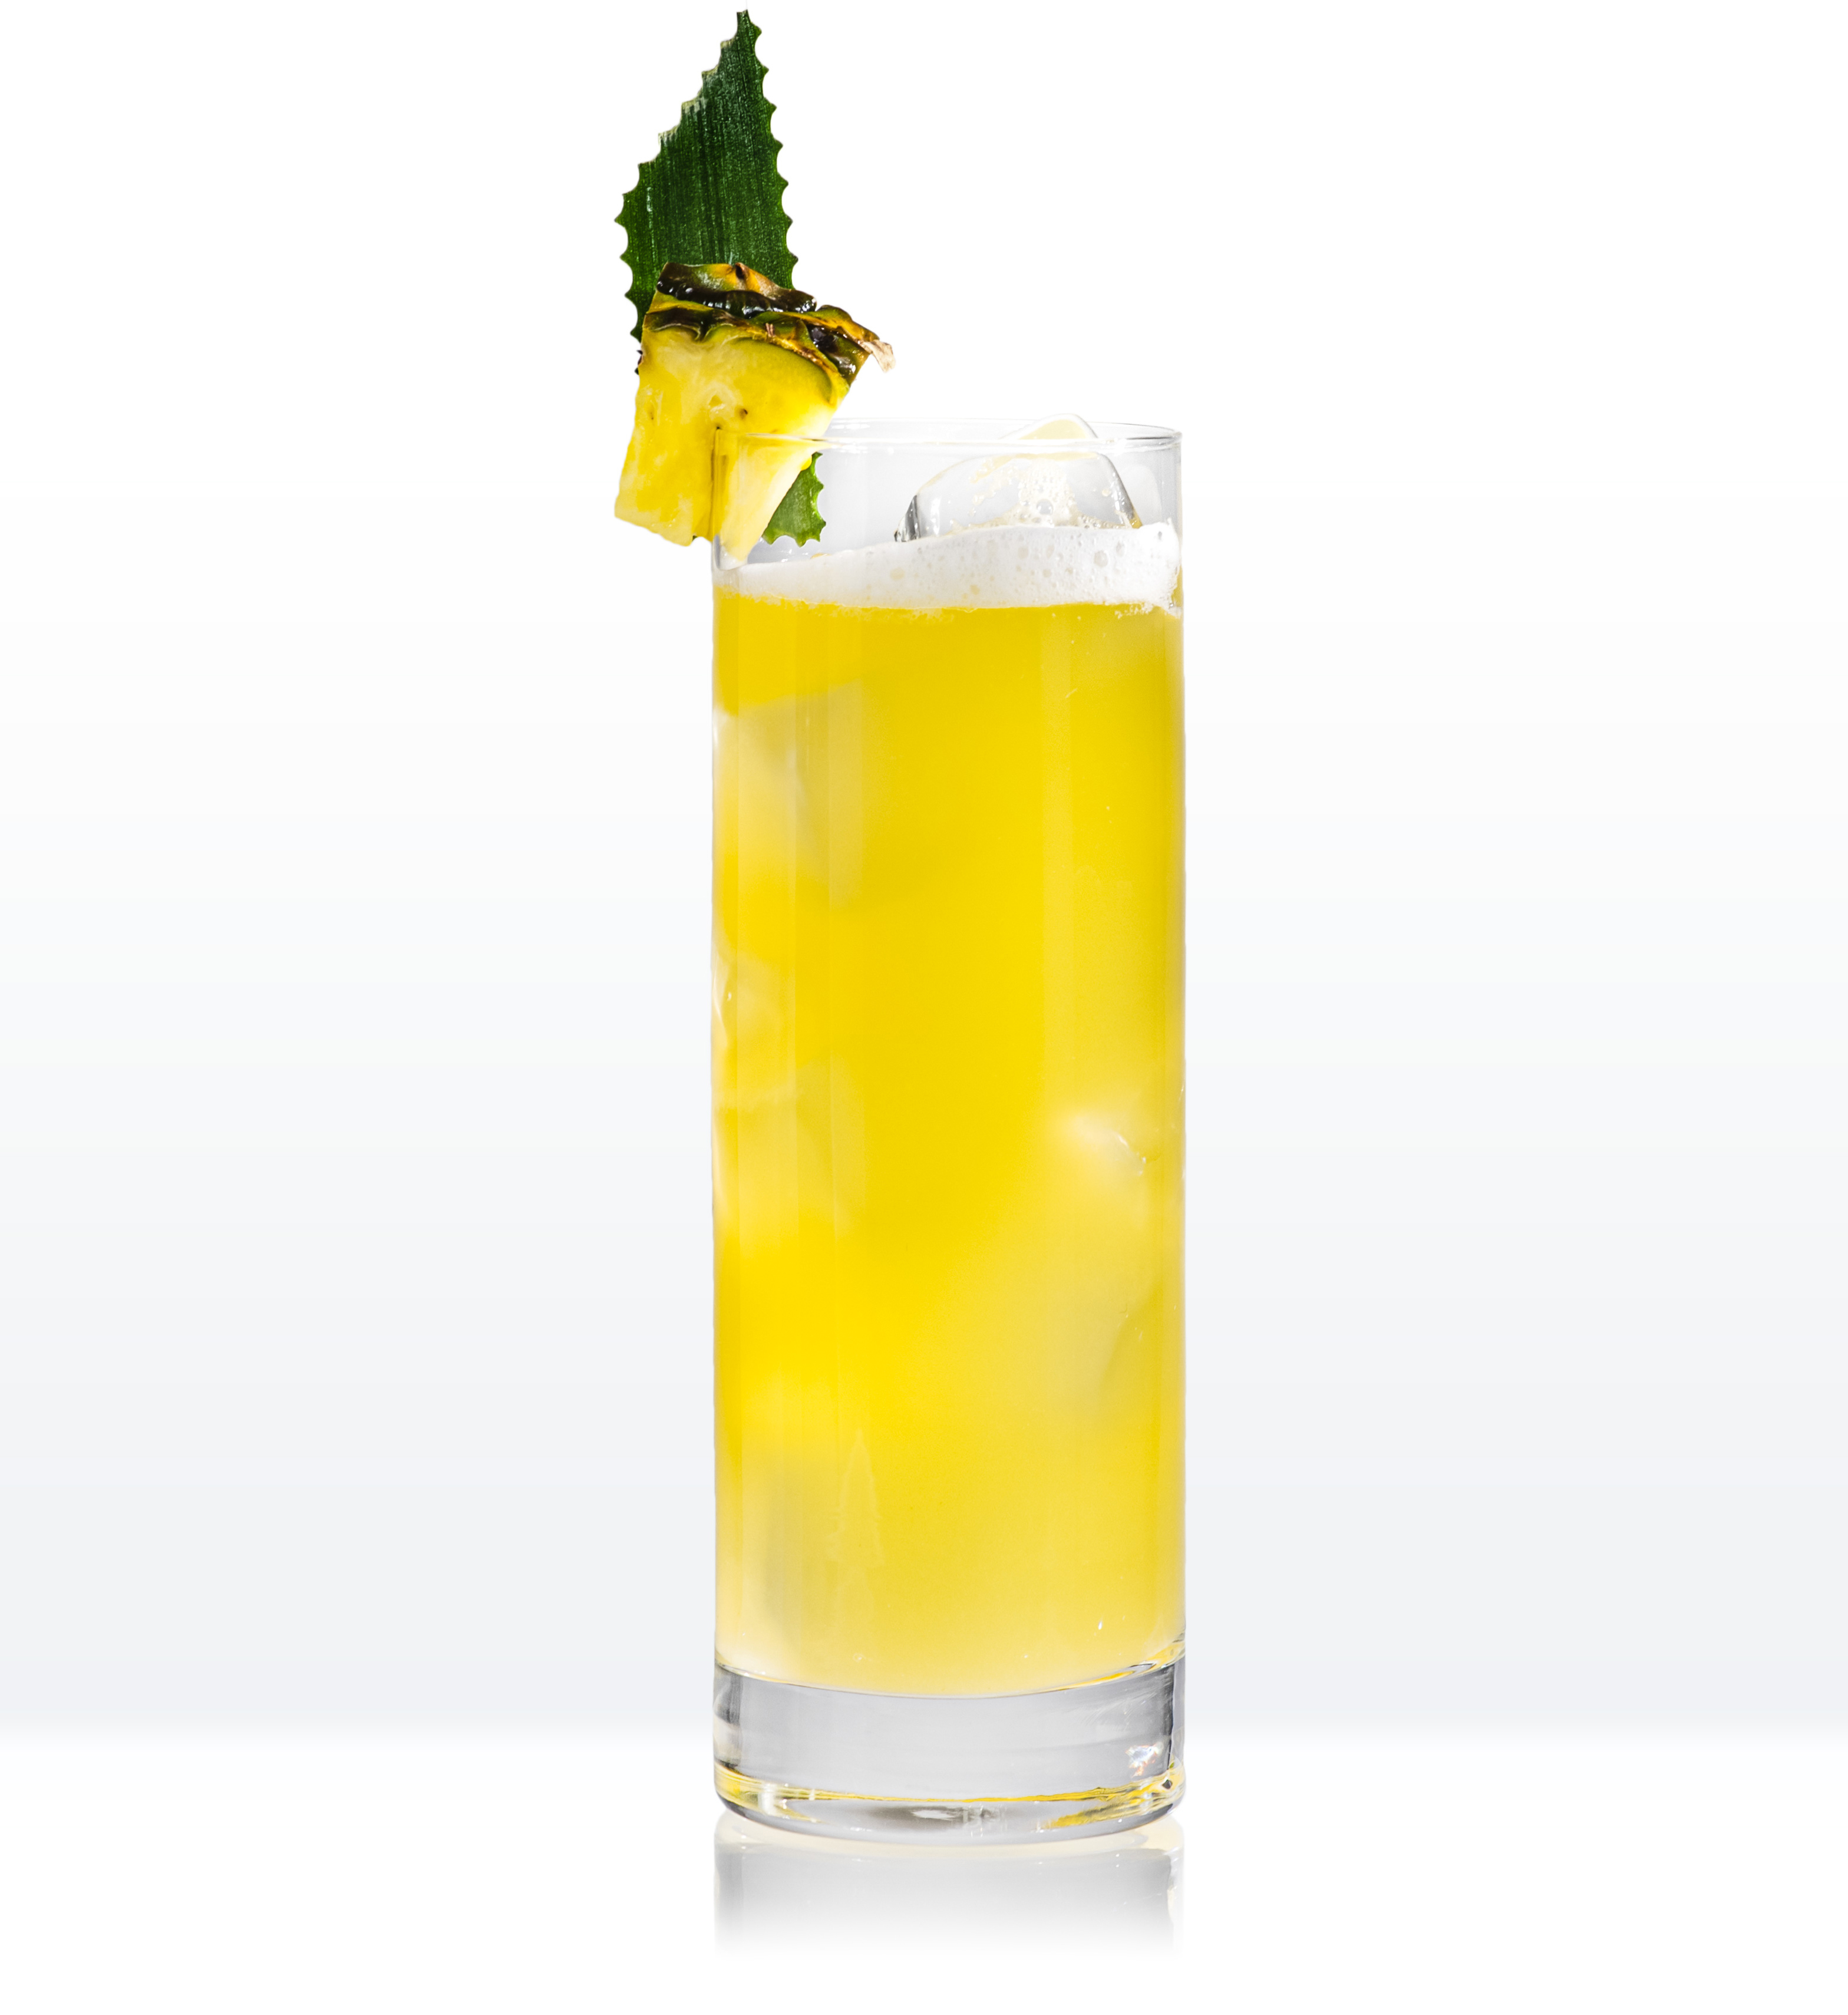 Yellow cocktail in highball glass garnished with pineapple chunk and pineapple leaf